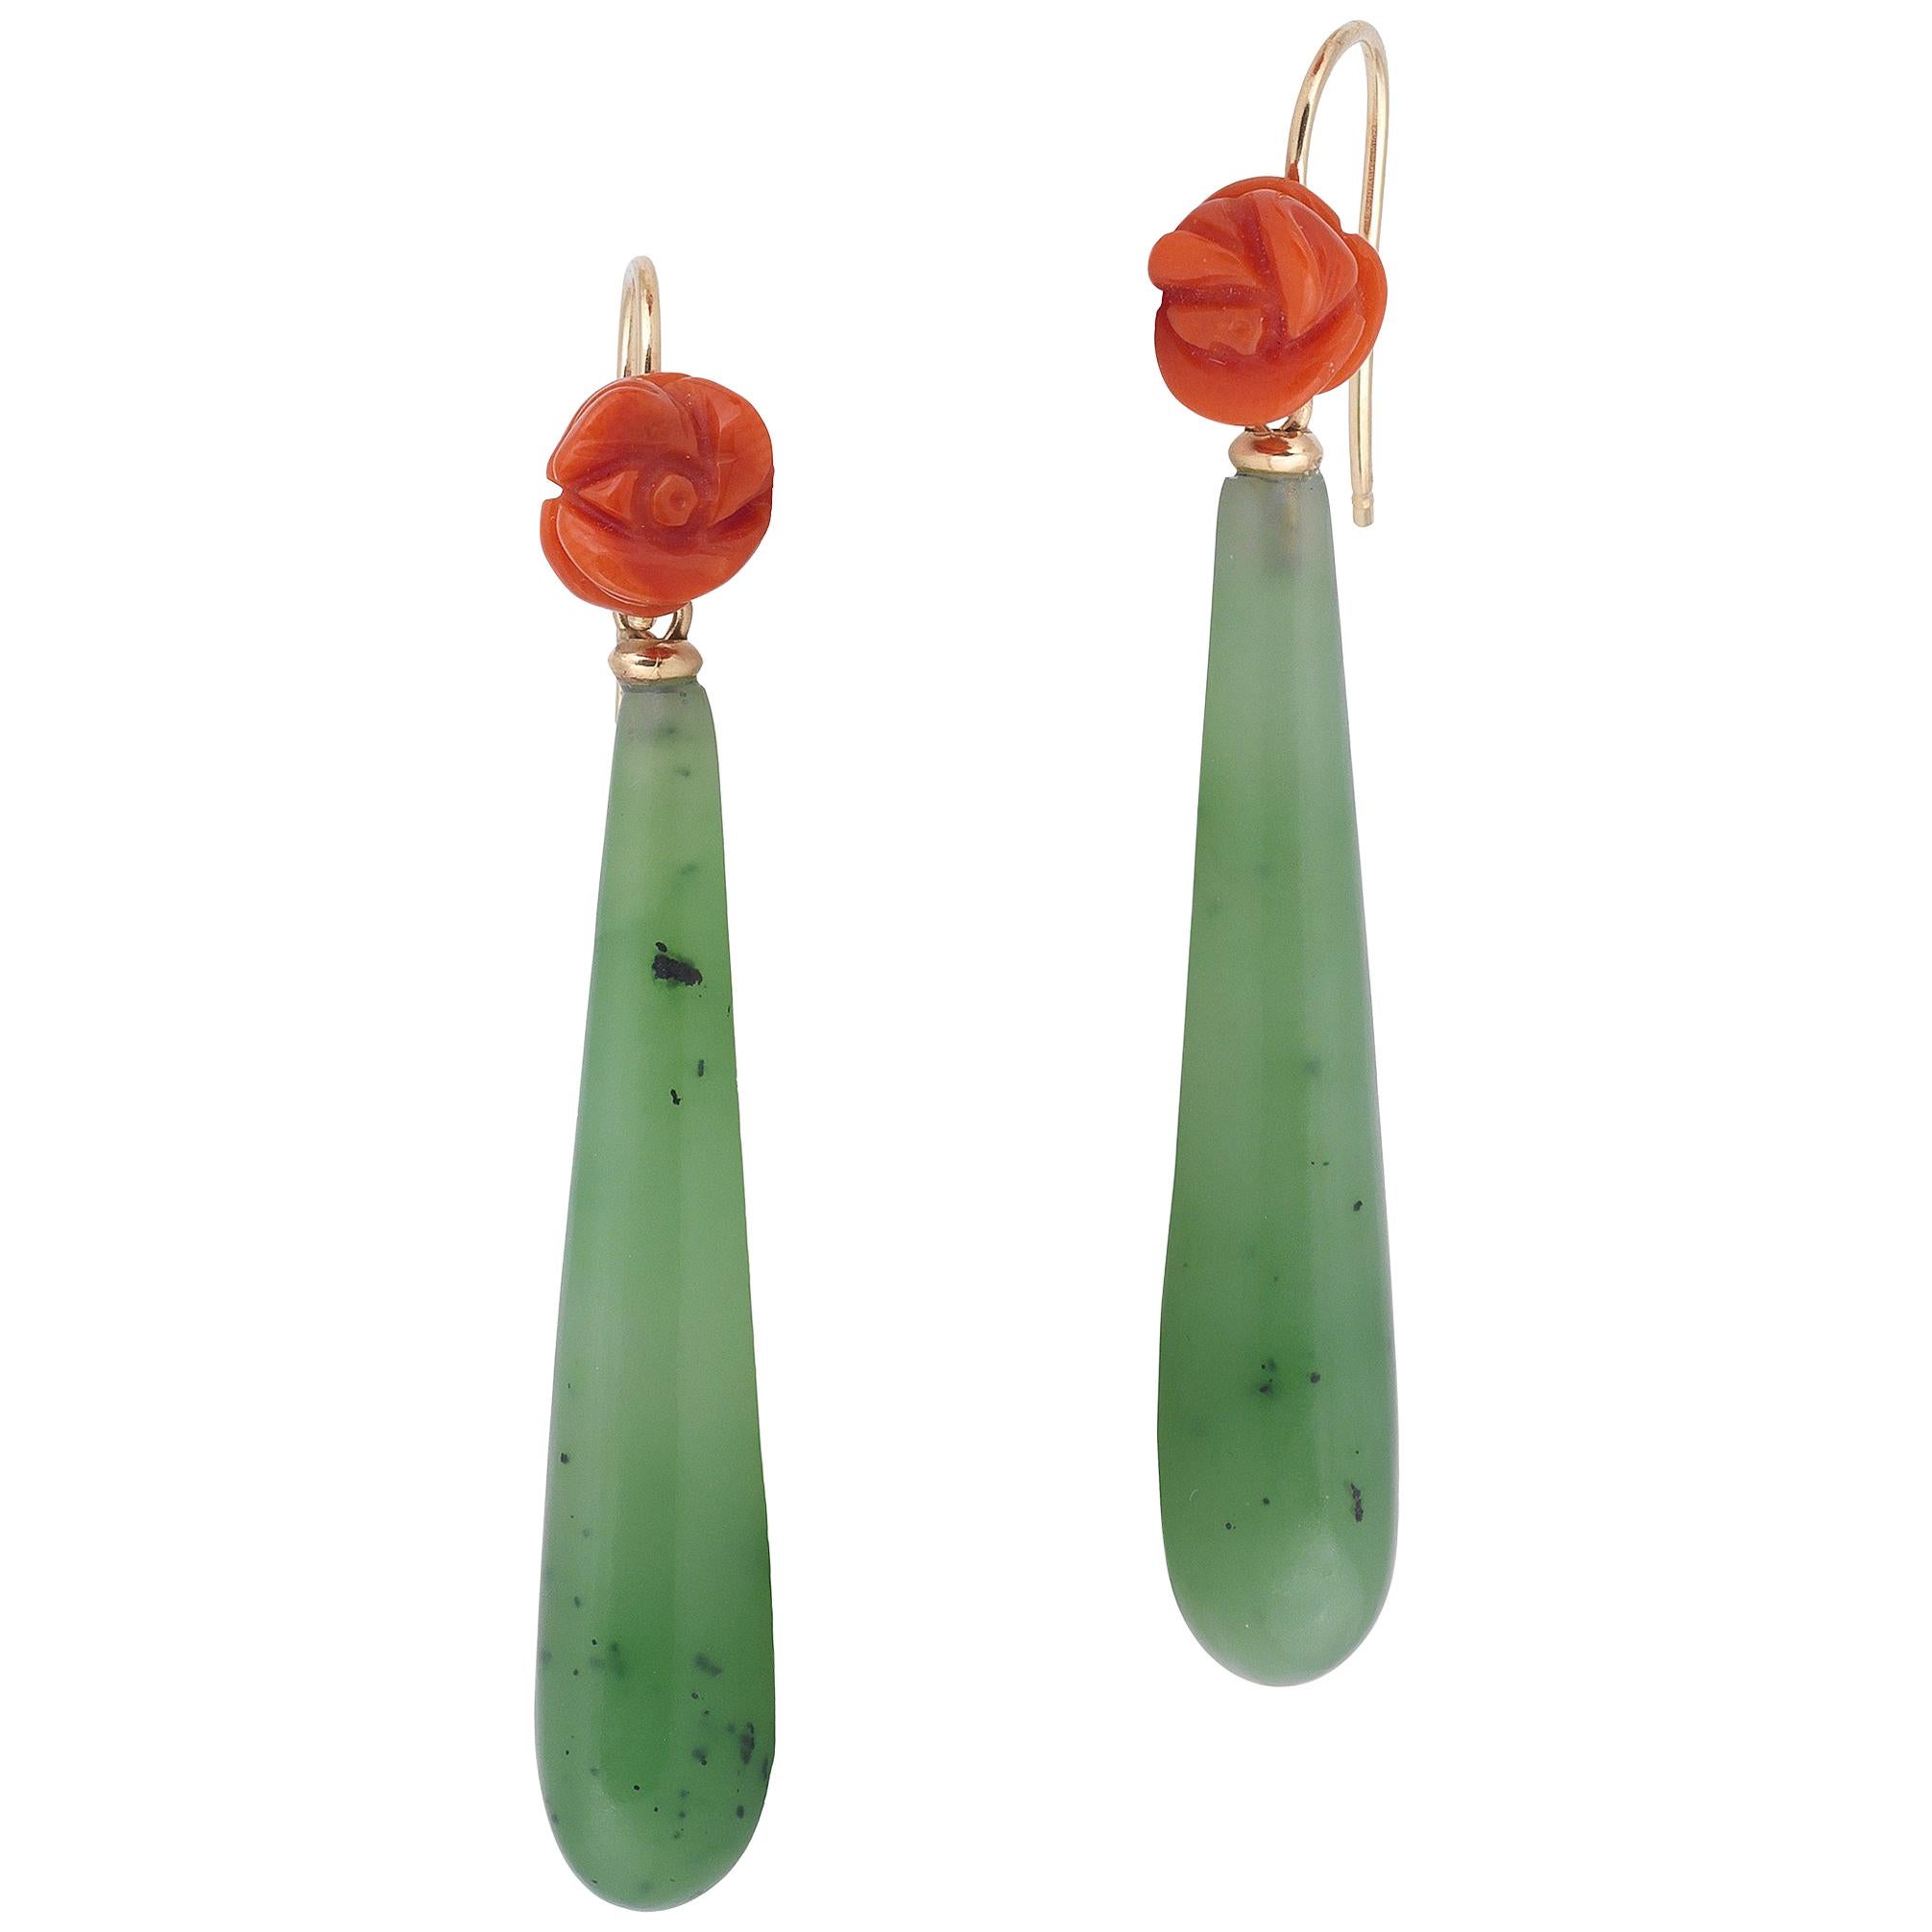 Pair of Jade, Coral and Gold Pendant Earrings